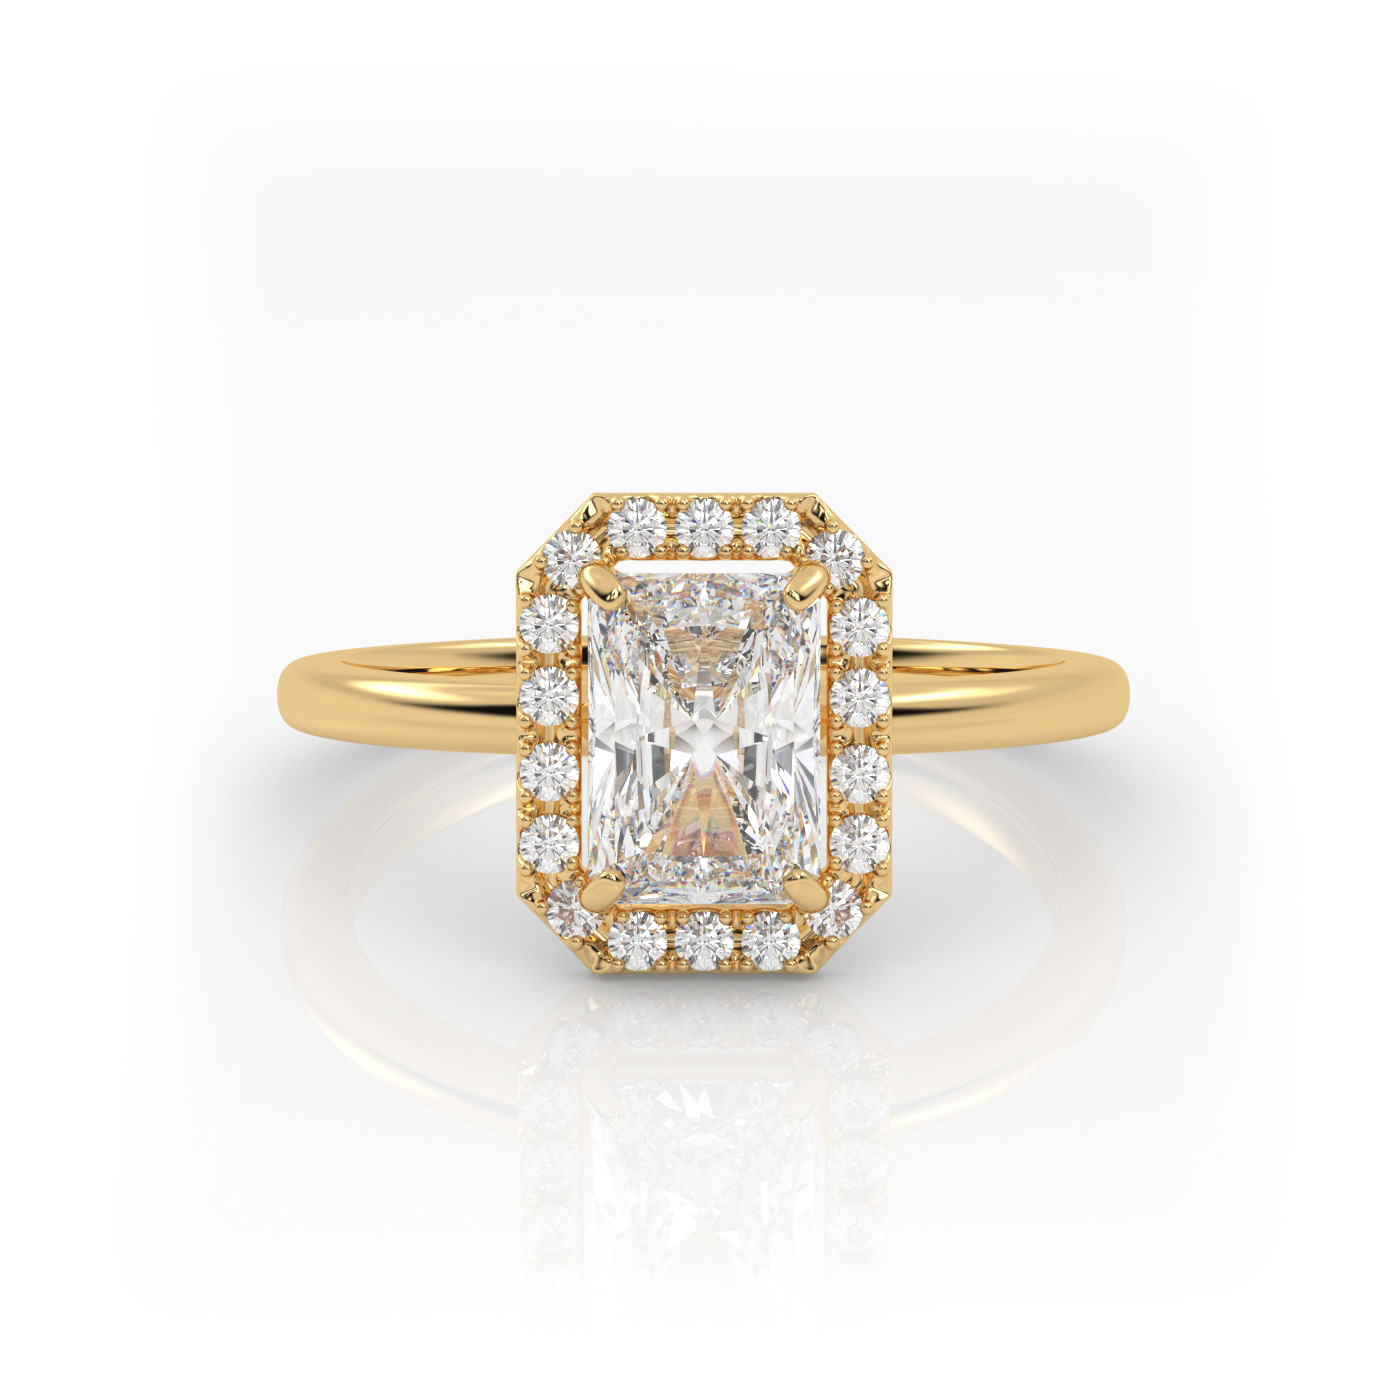 18K YELLOW GOLD Radiant Diamond Cut Engagement Ring with Halo Style